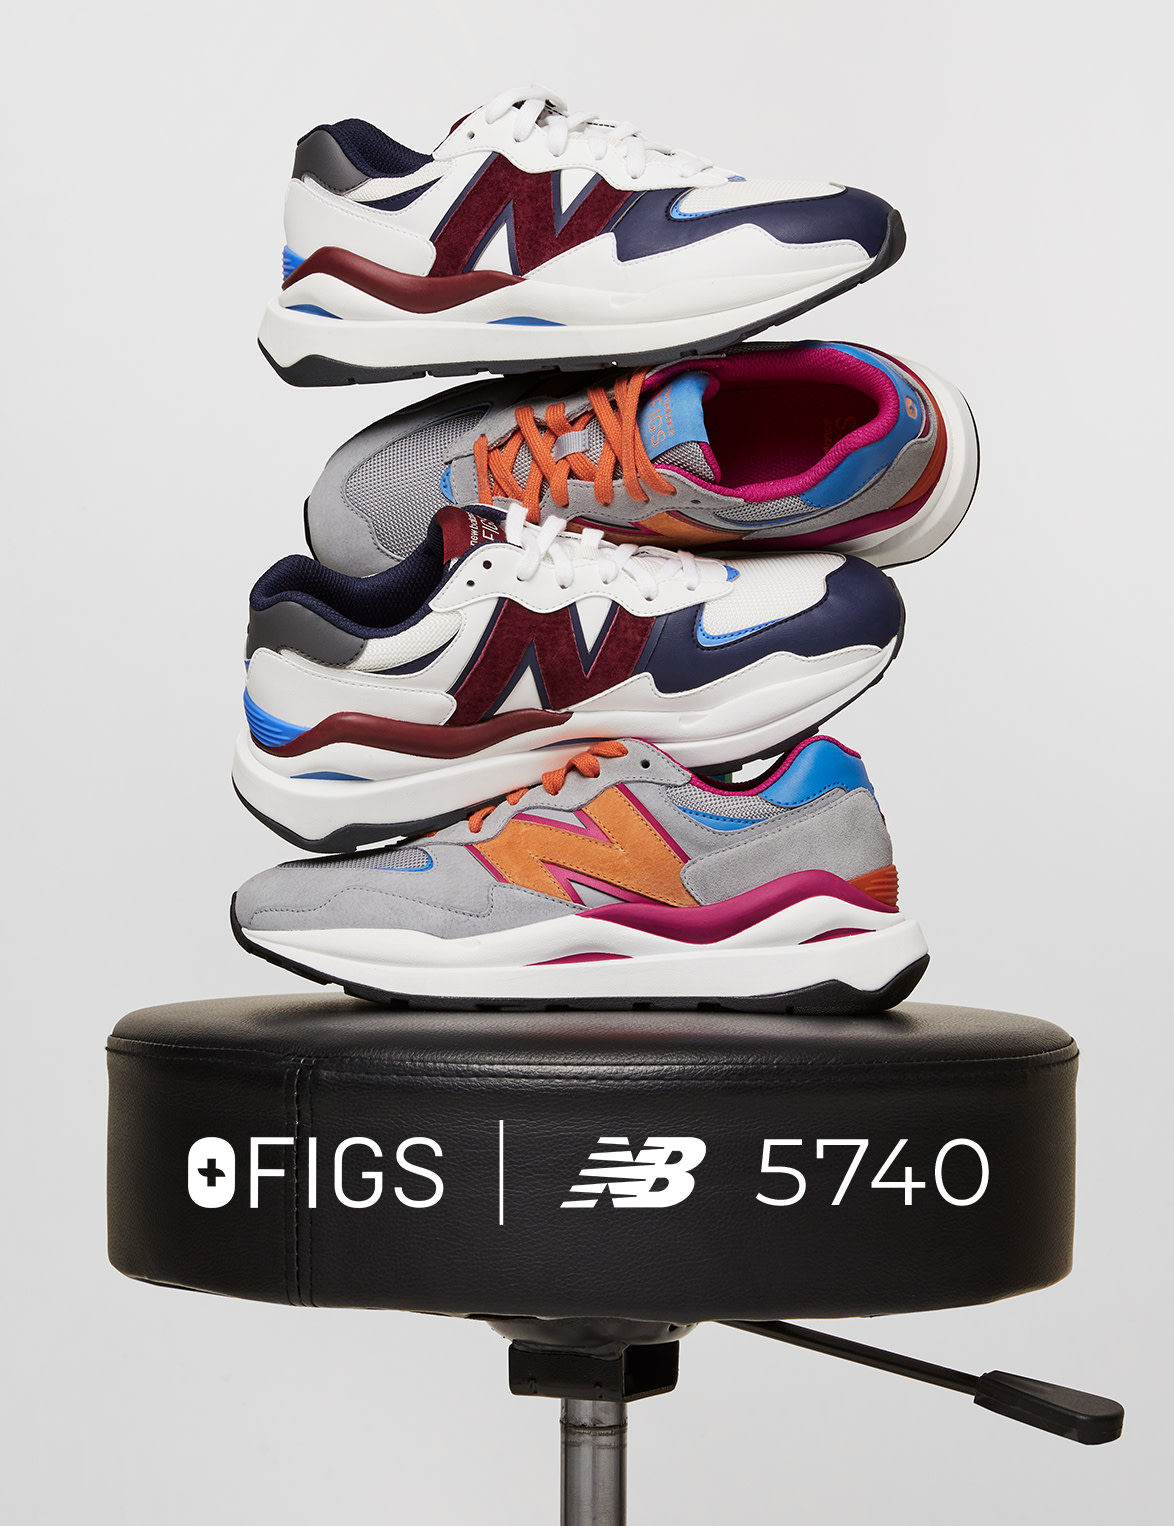 FIGS | NEW BALANCE 5740. Stylish enough to wear off-shift, sensible enough to make your podiatrist proud. Here in two NEW Limited Edition colors.